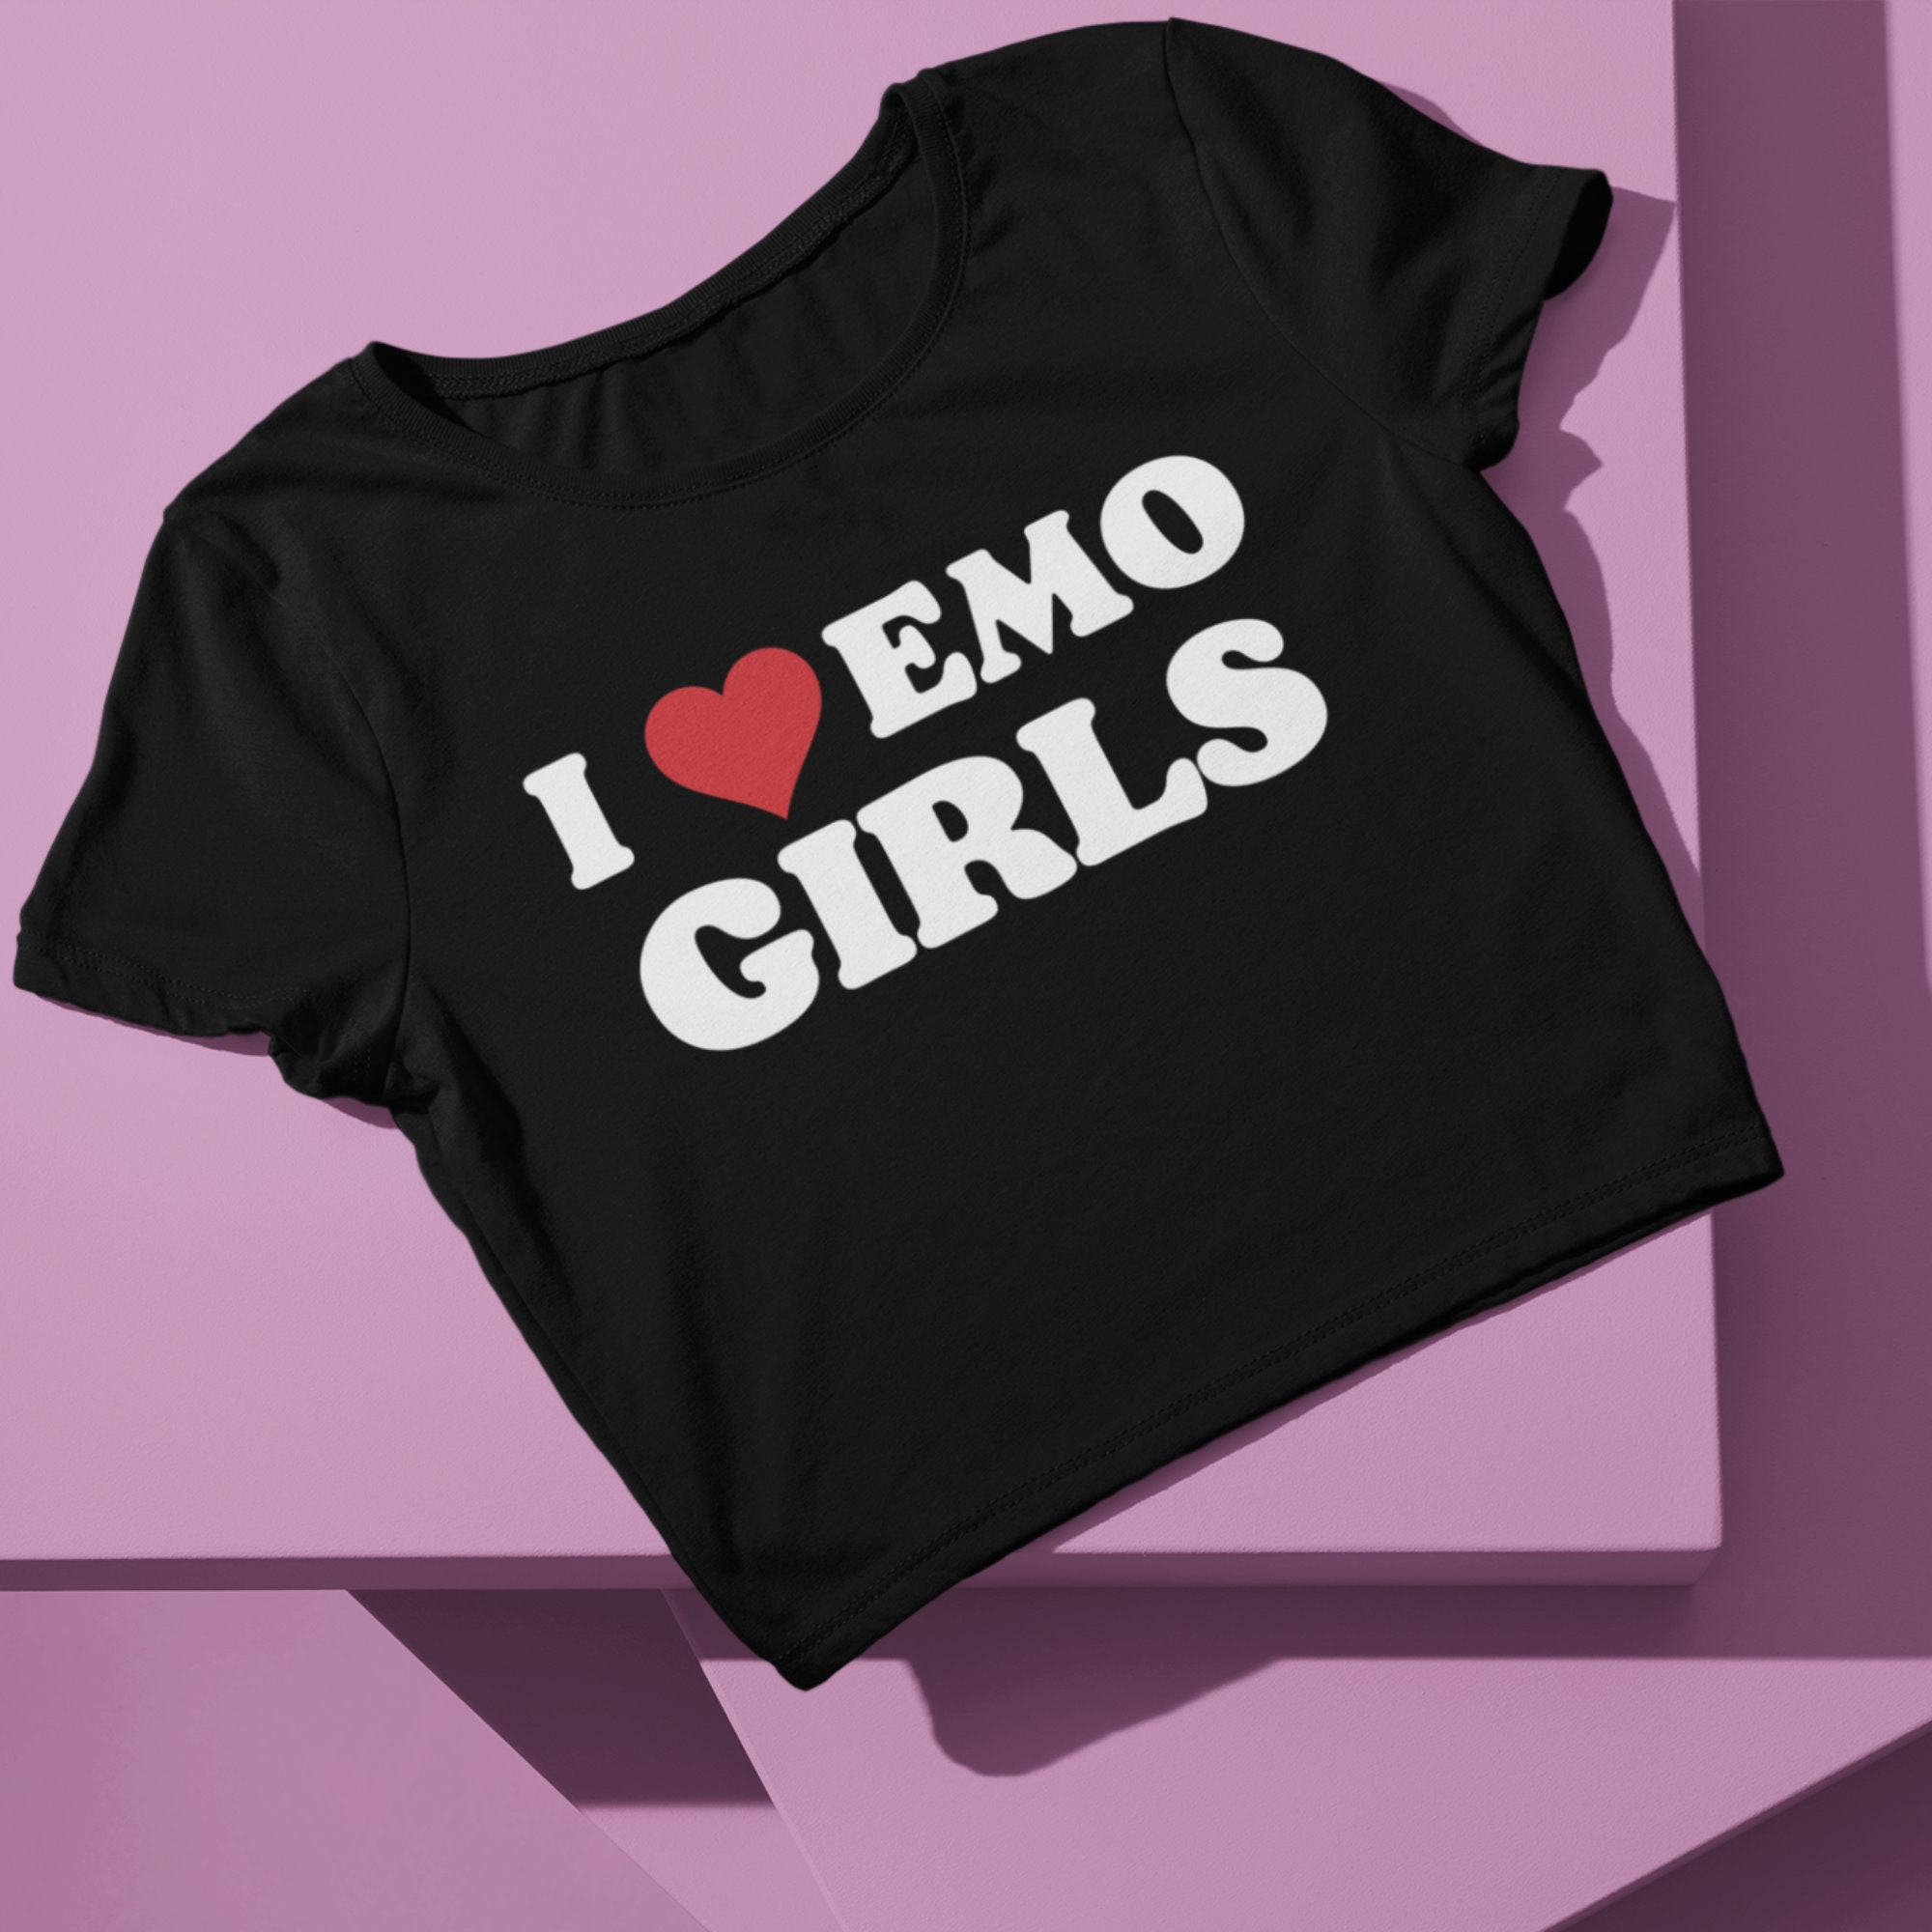 I Love Emo Girls Essential T-Shirt for Sale by atoprac59